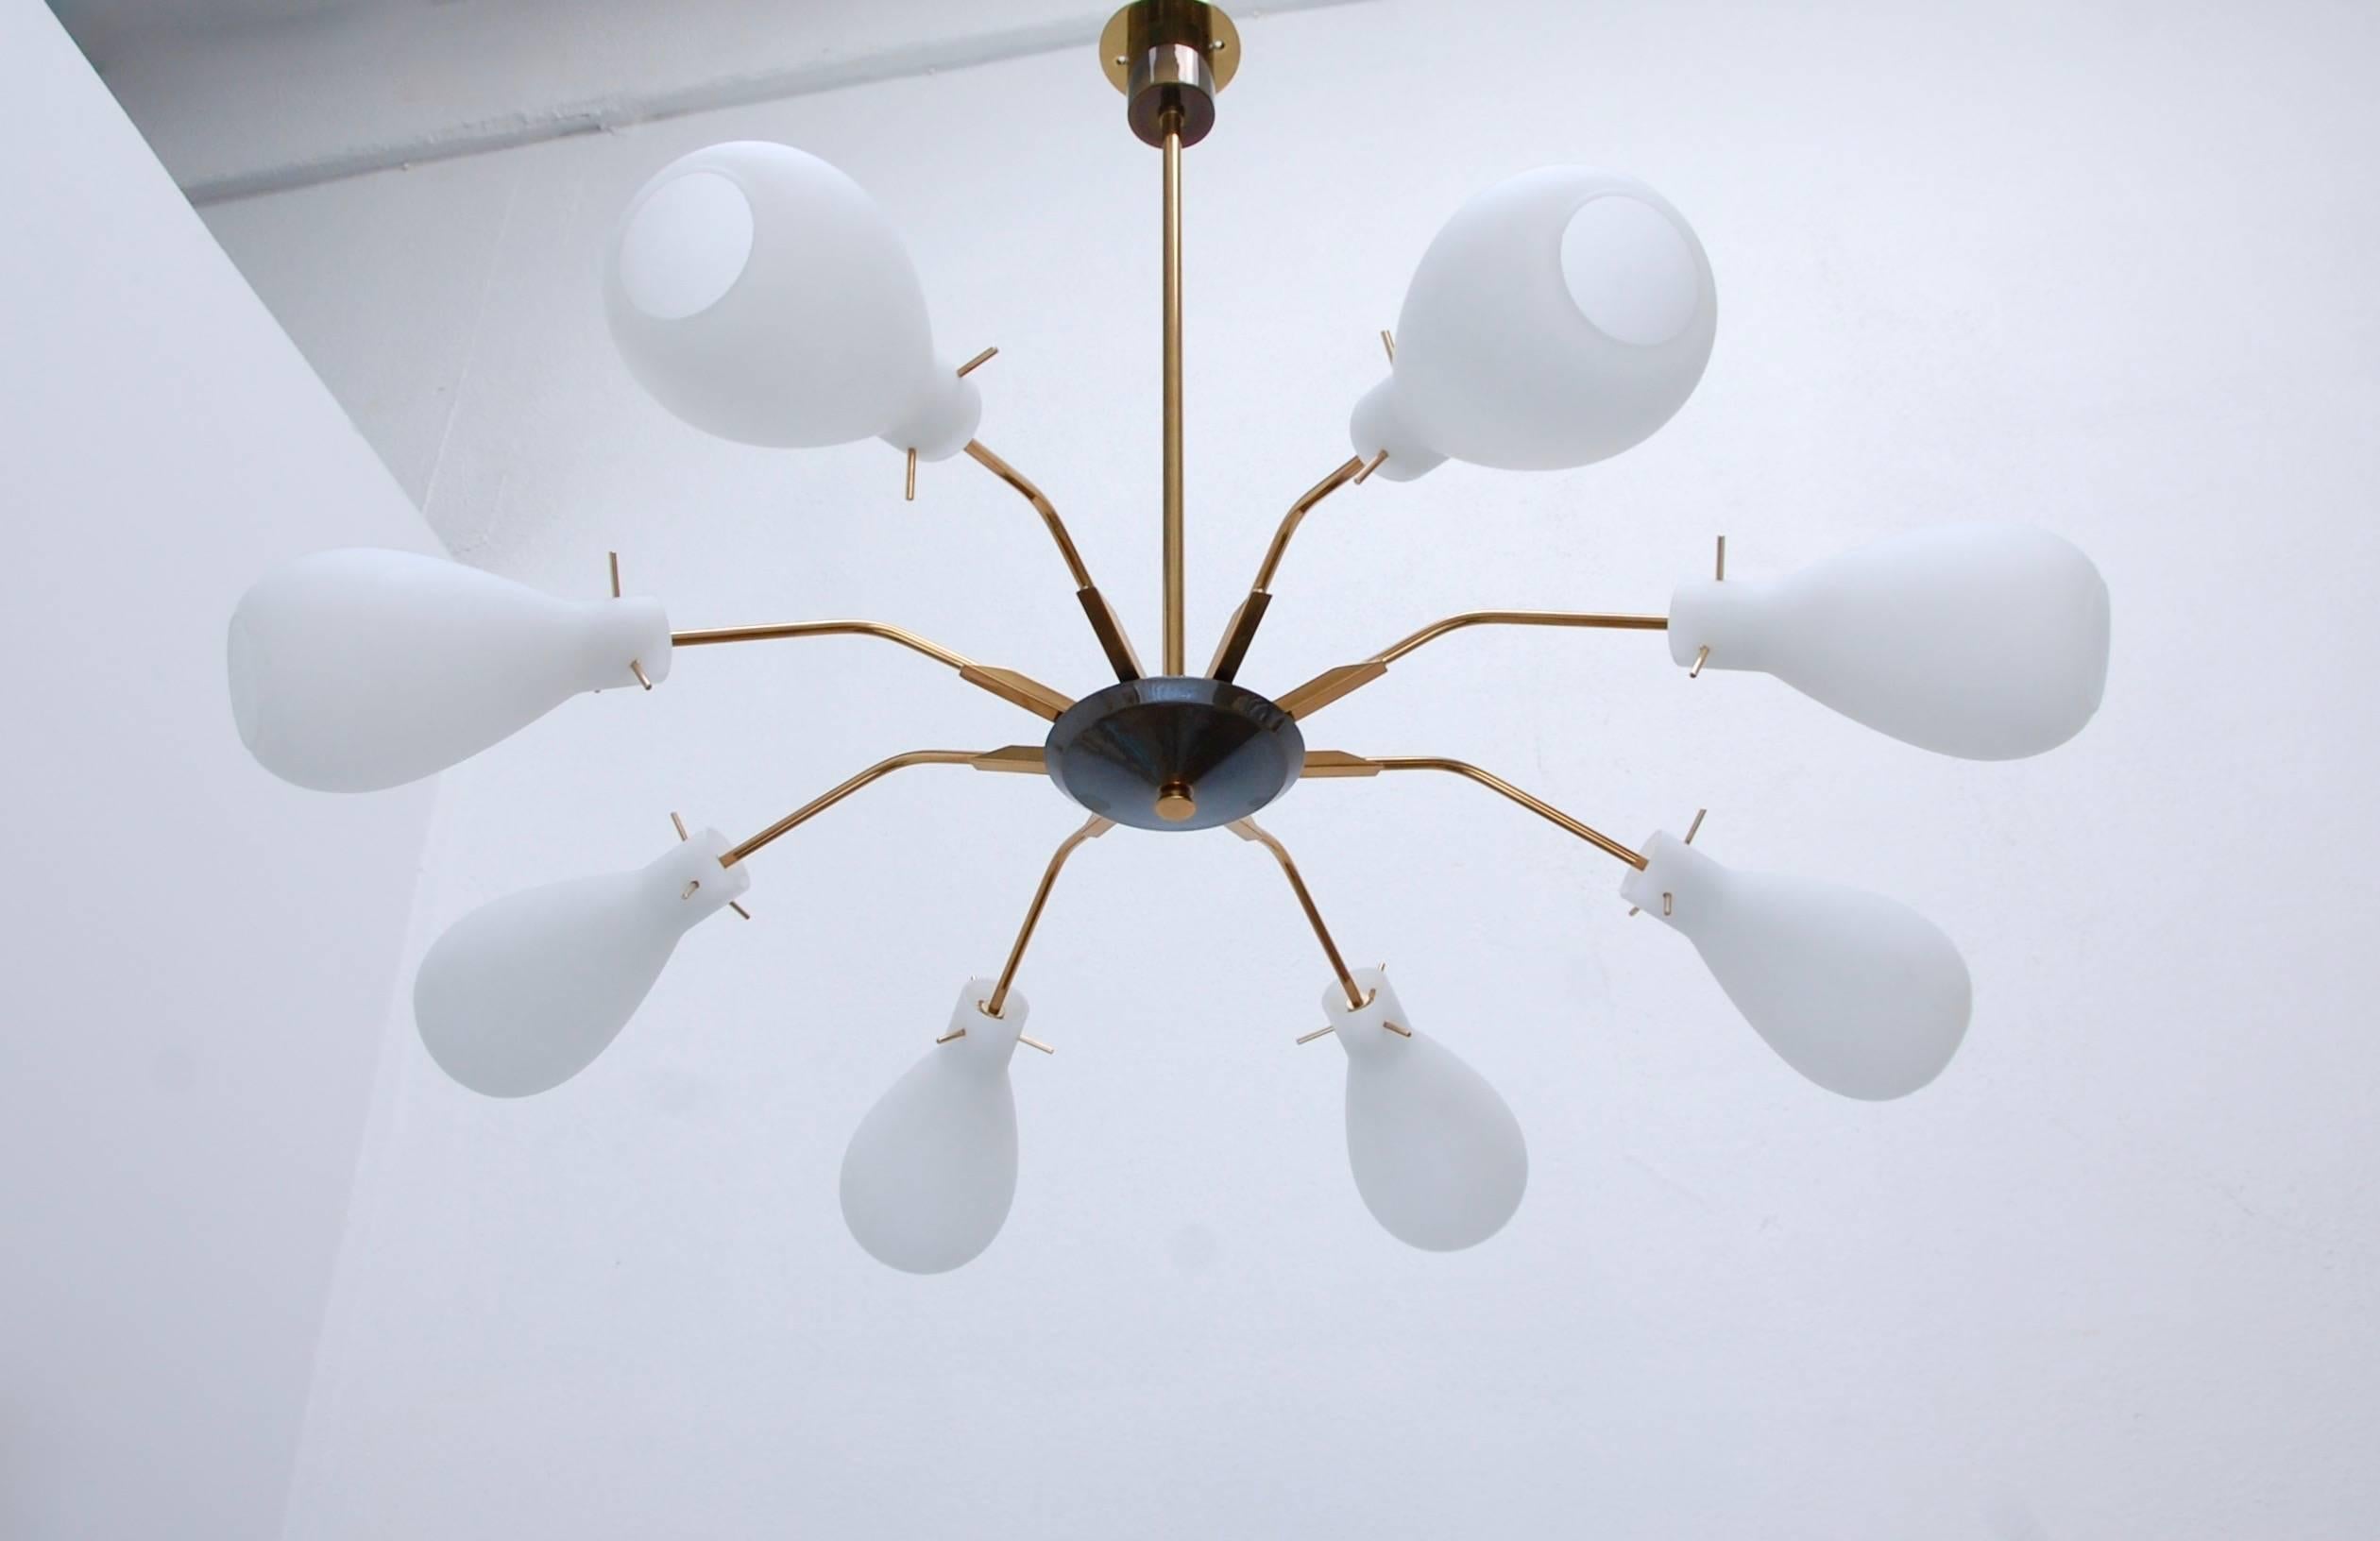 Stunning Mid-Century Italian chandelier with eight beautiful blown glass shades. Single candelabra based socket per arm. Drop can be adjusted by request.
Measures: Chandelier height: 7”.
Diameter: 37”.
OAD: 30”.
                             